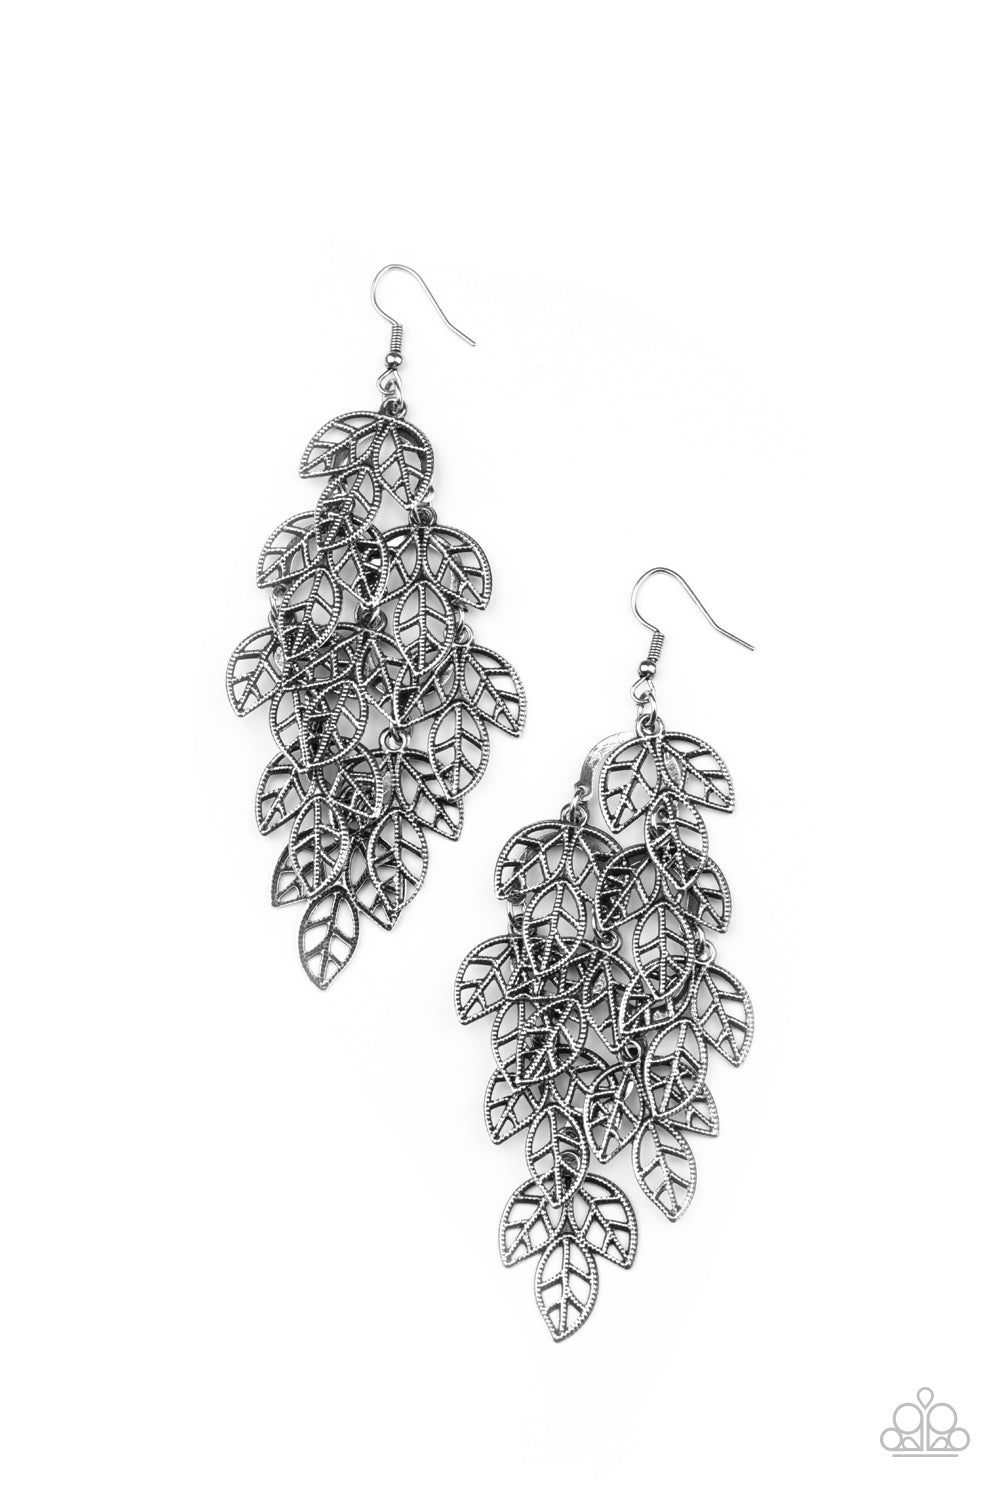 Paparazzi Accessories The Shakedown - Silver Earrings - Lady T Accessories